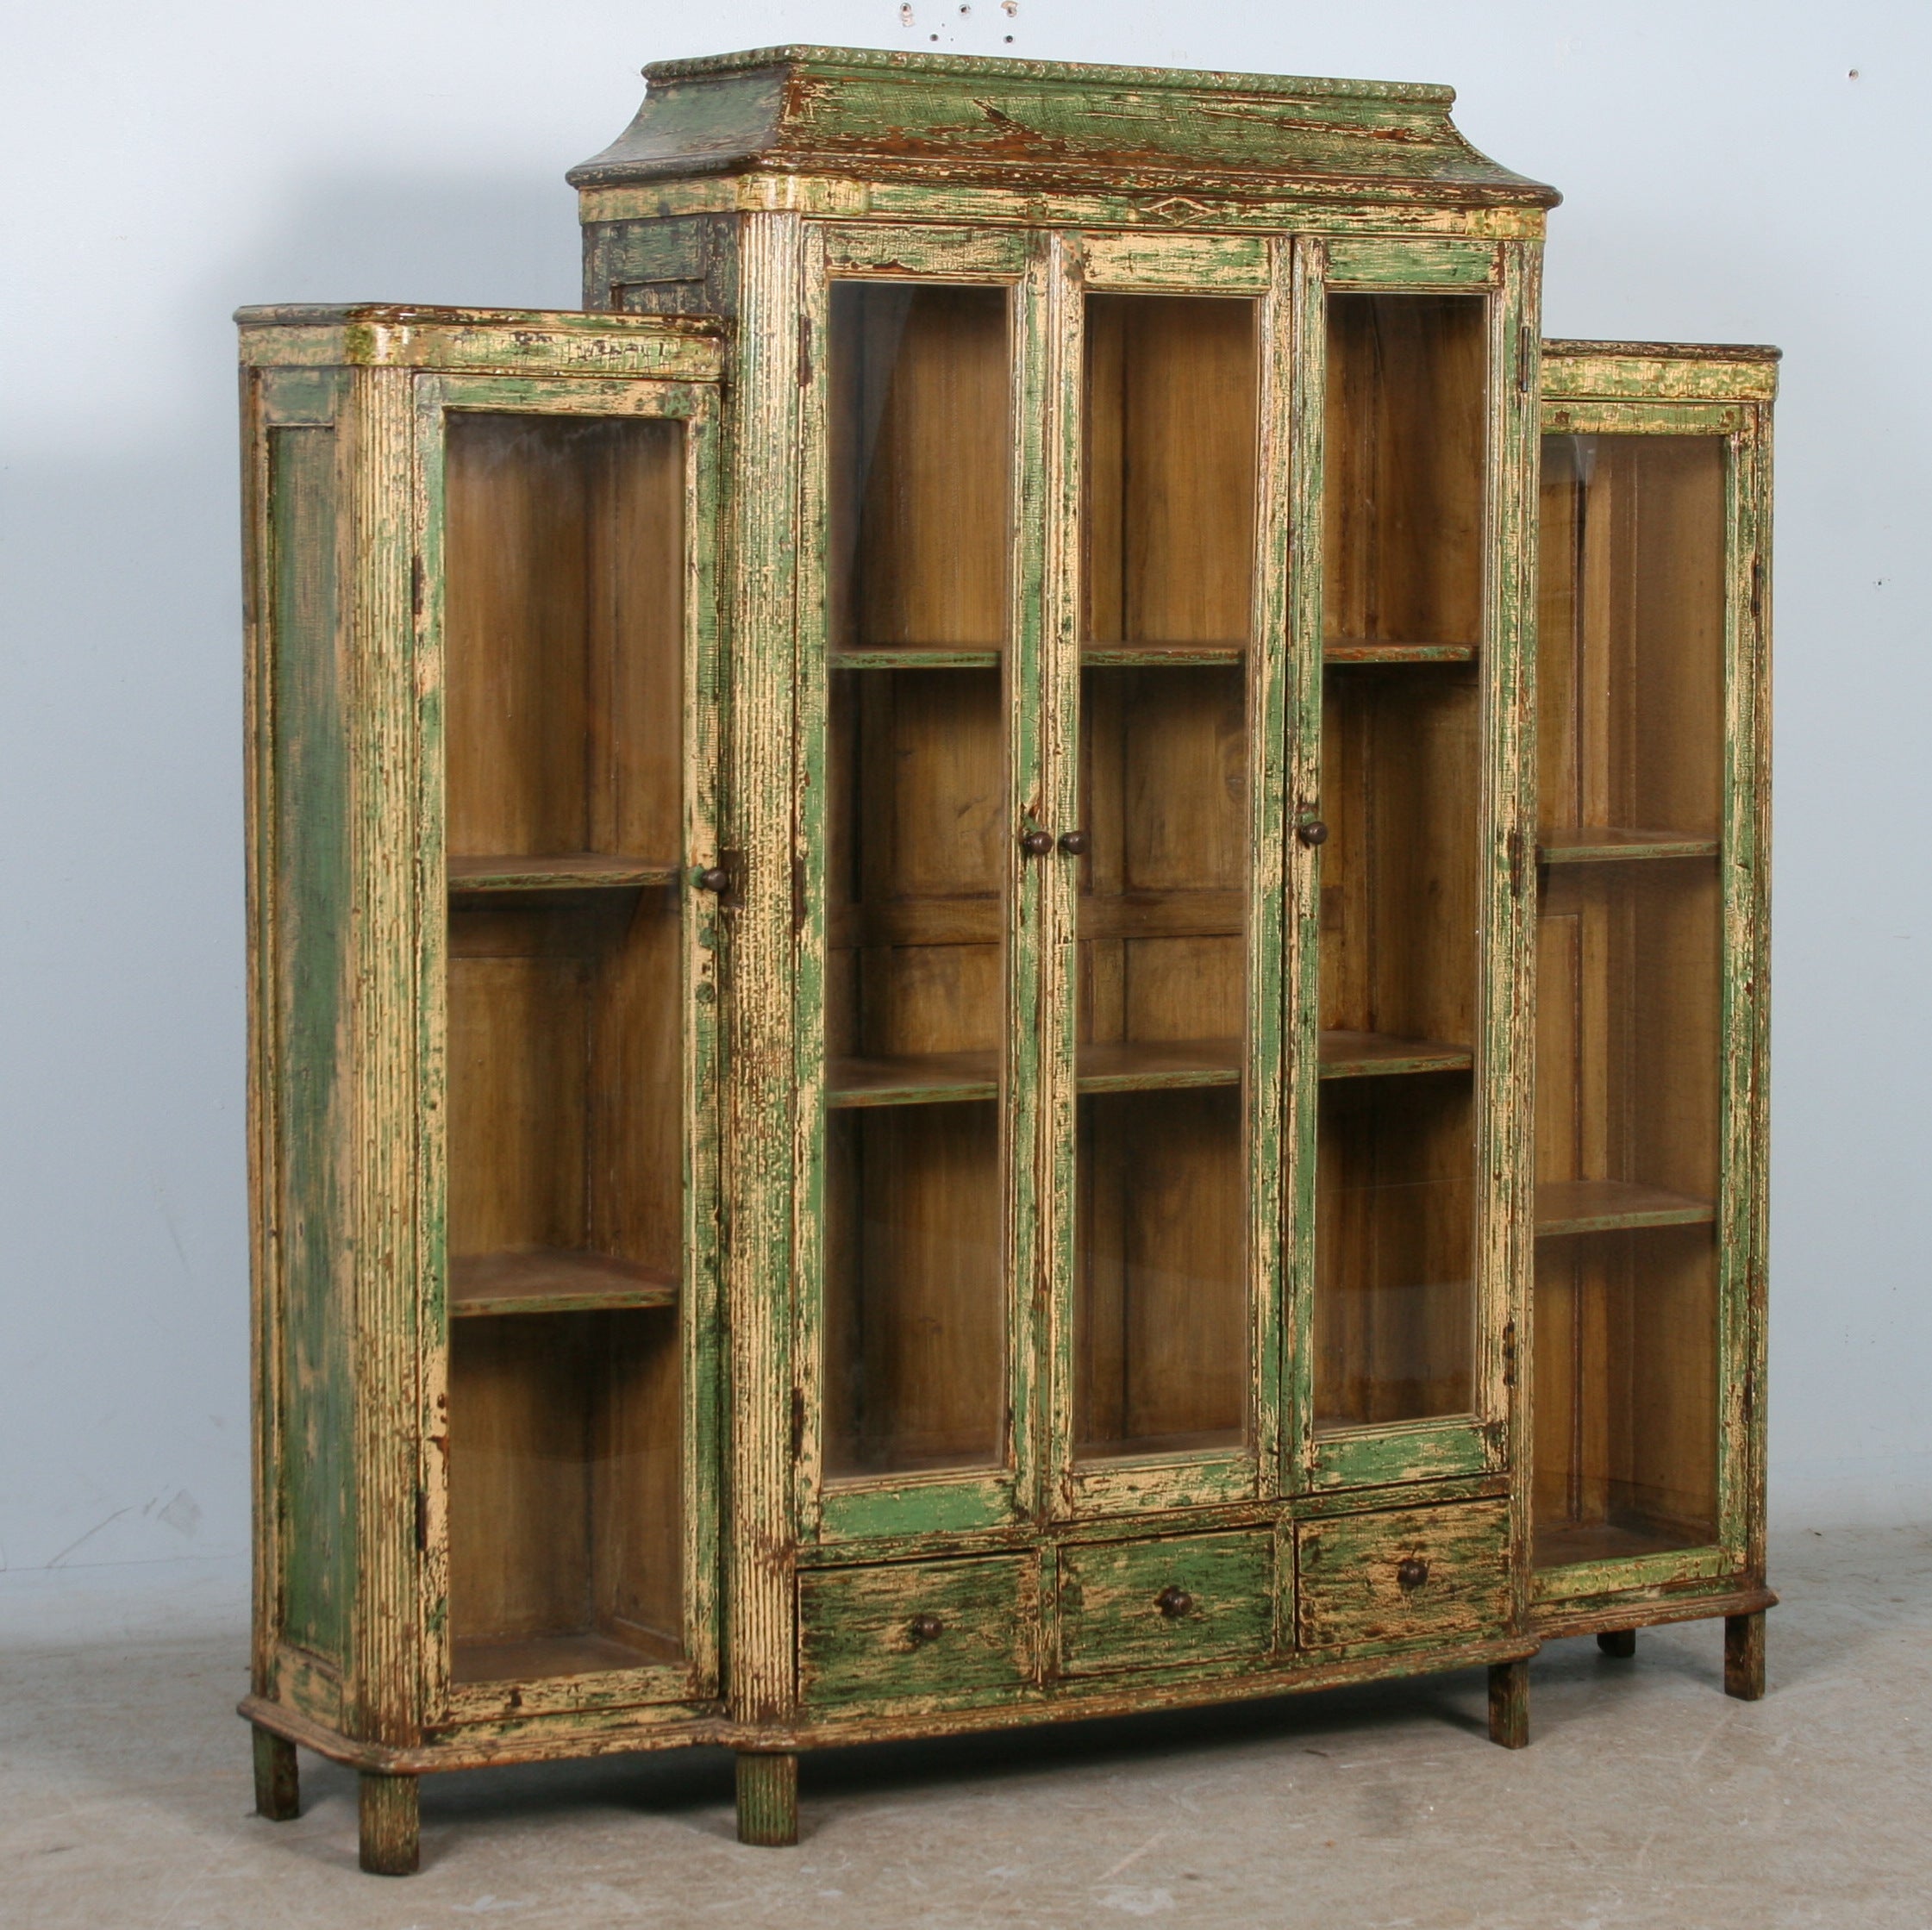 Antique Green Bookcase/Display Cabinet with Glass Doors, China circa 1890